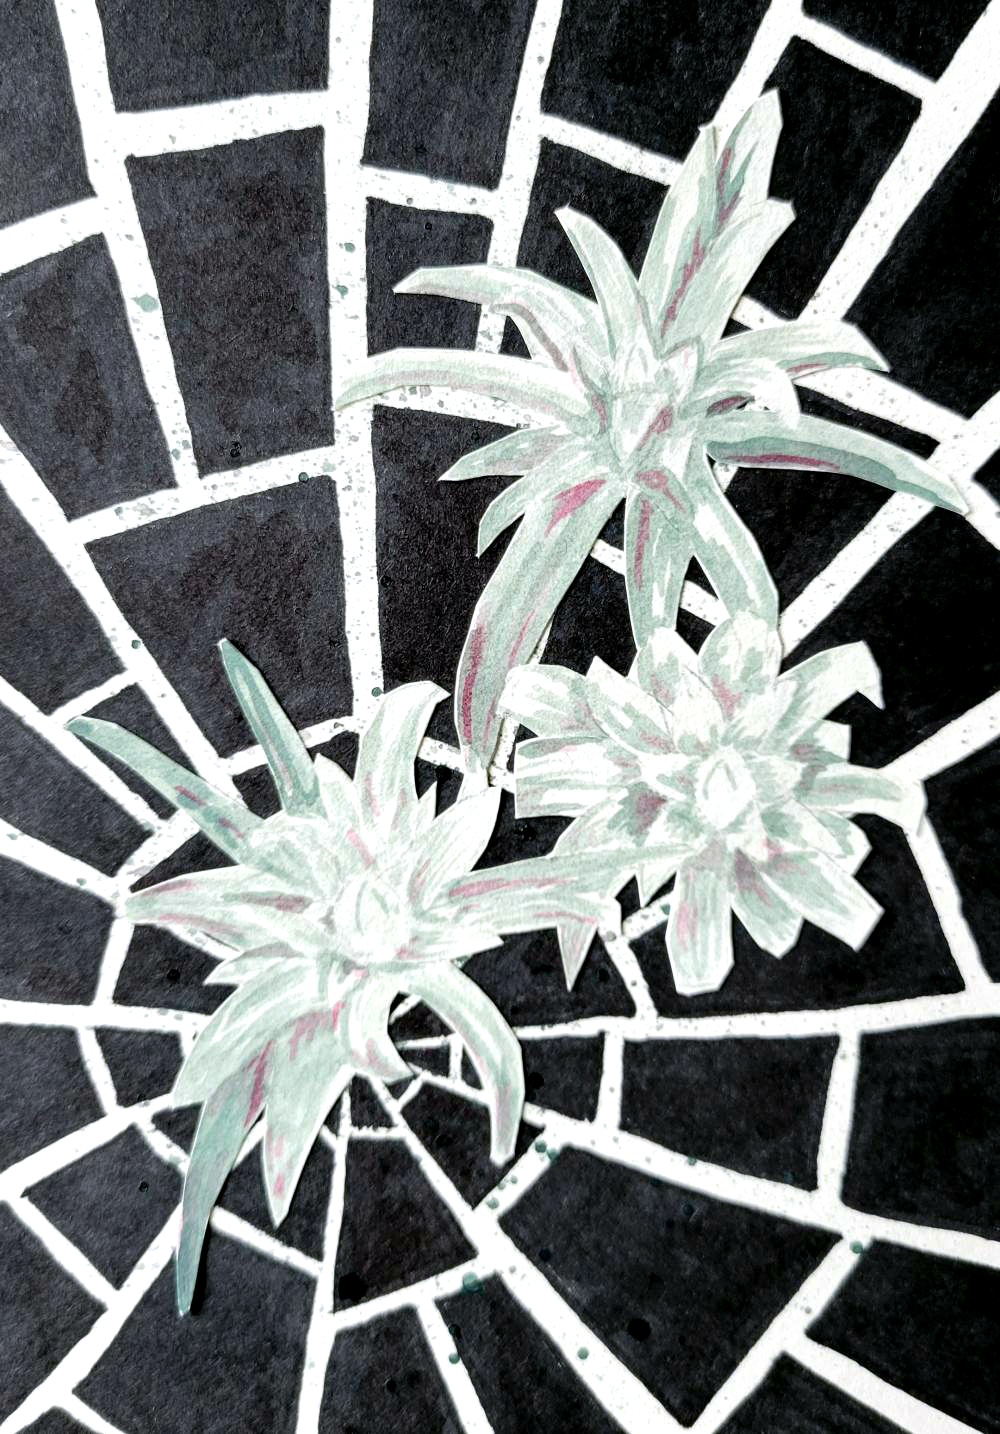 A painting of edelweiss on a shattered background